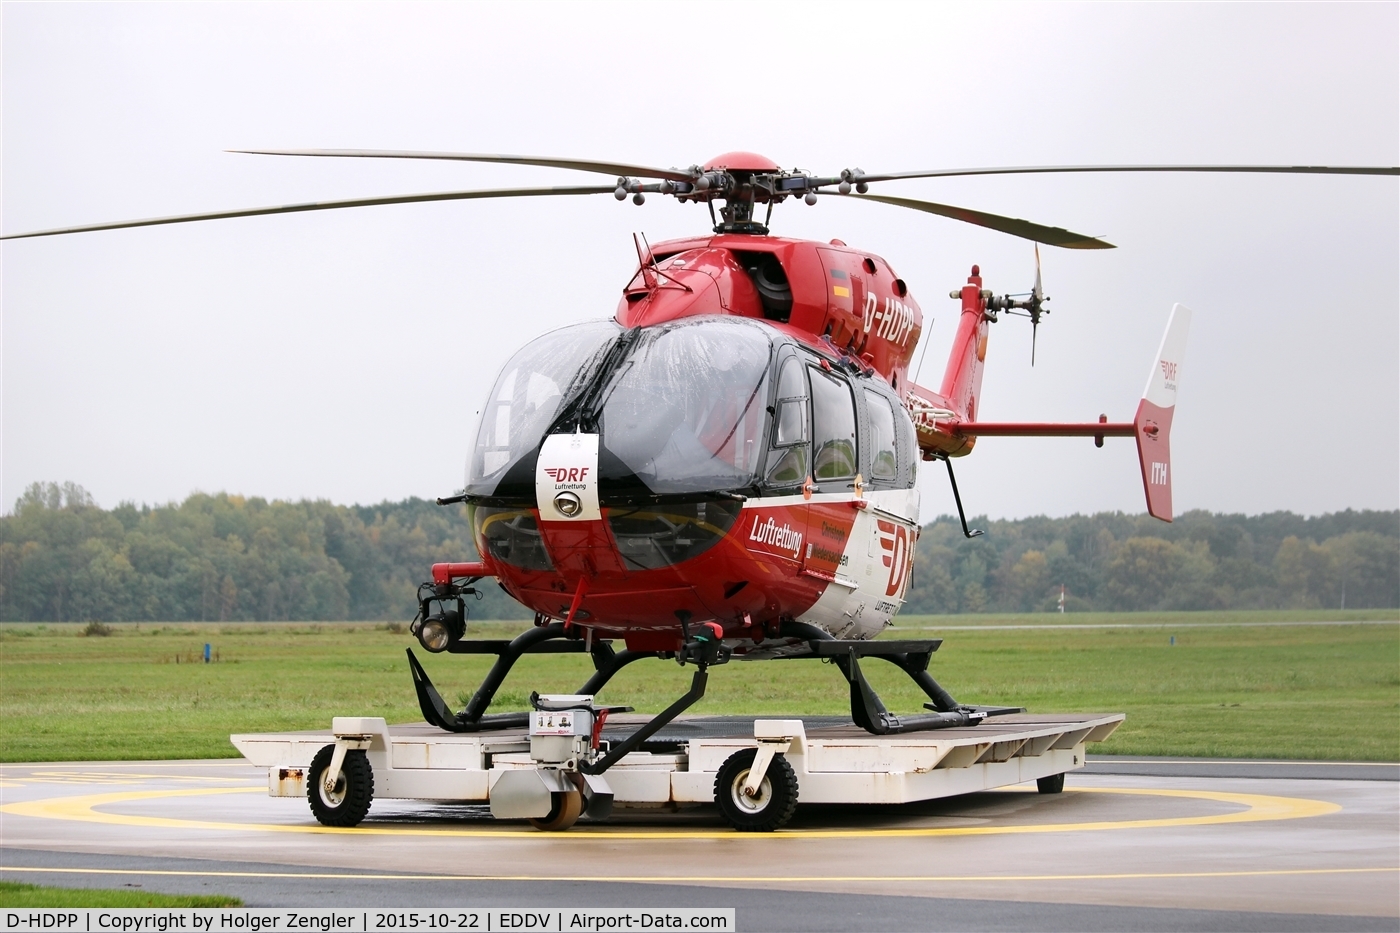 D-HDPP, 2004 Eurocopter-Kawasaki EC-145 (BK-117C-2) C/N 9055, Rescue heli on stand by for a new task....